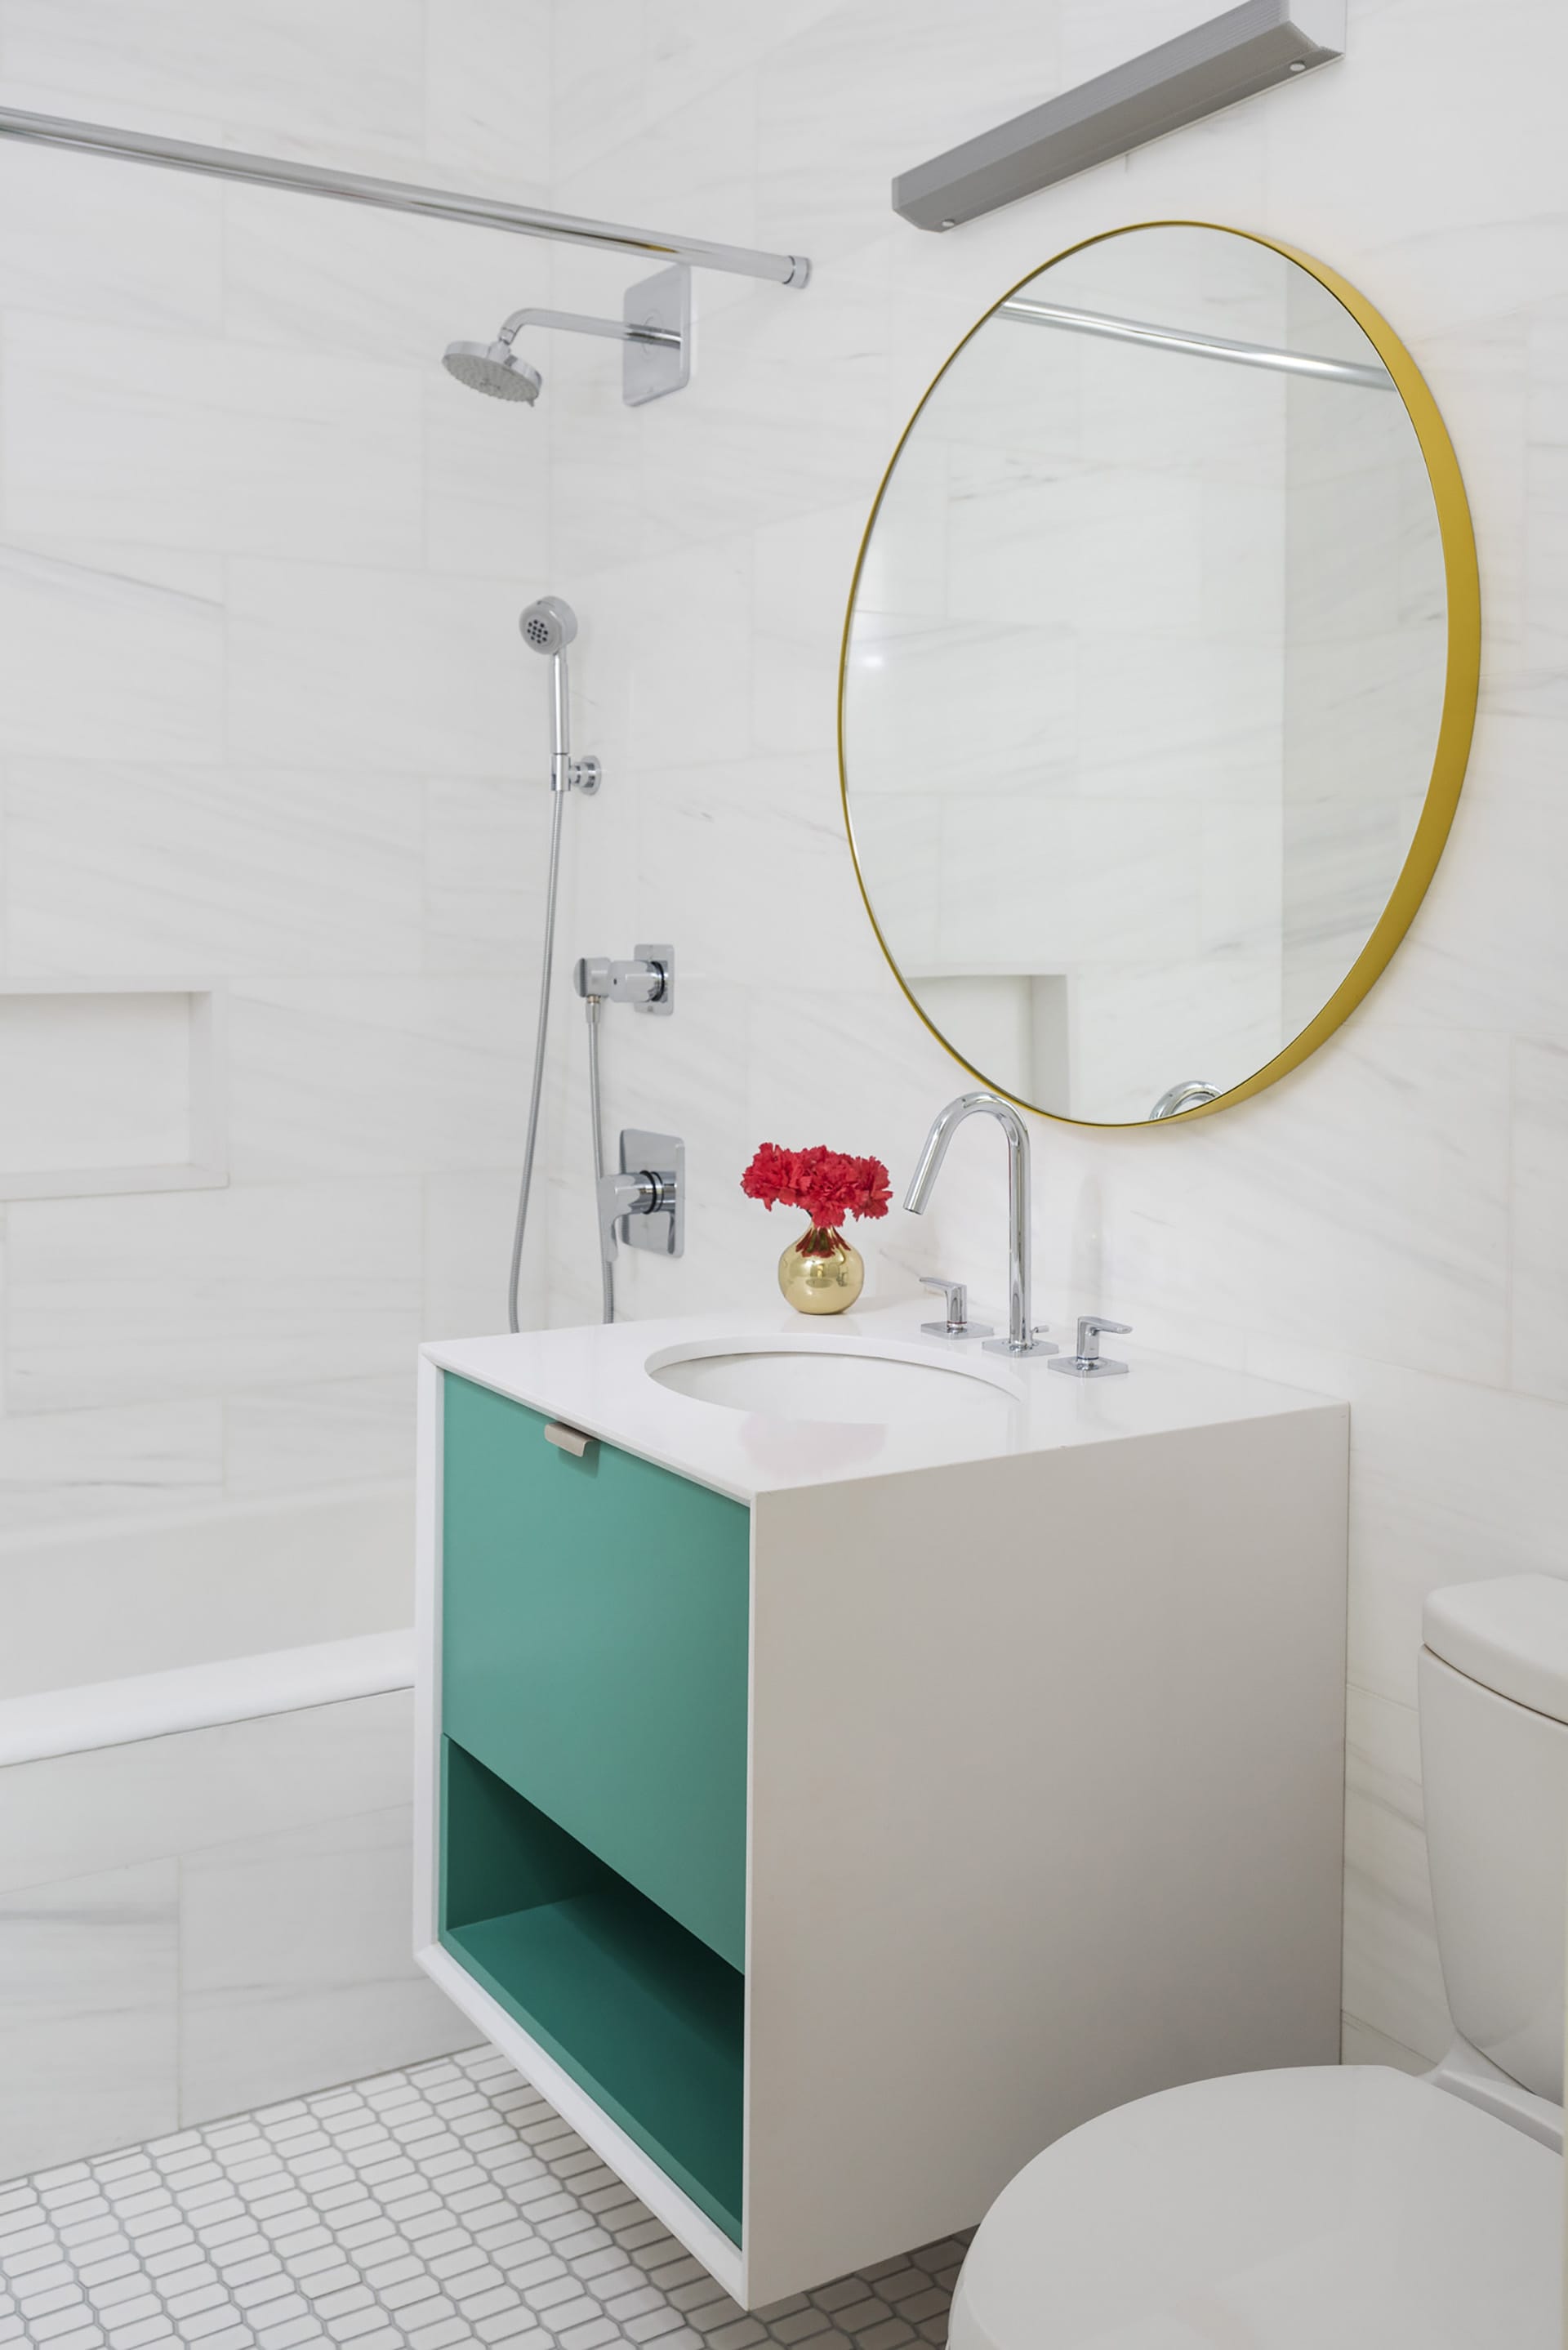 Floating vanity in an all-white bathroom with teal drawers